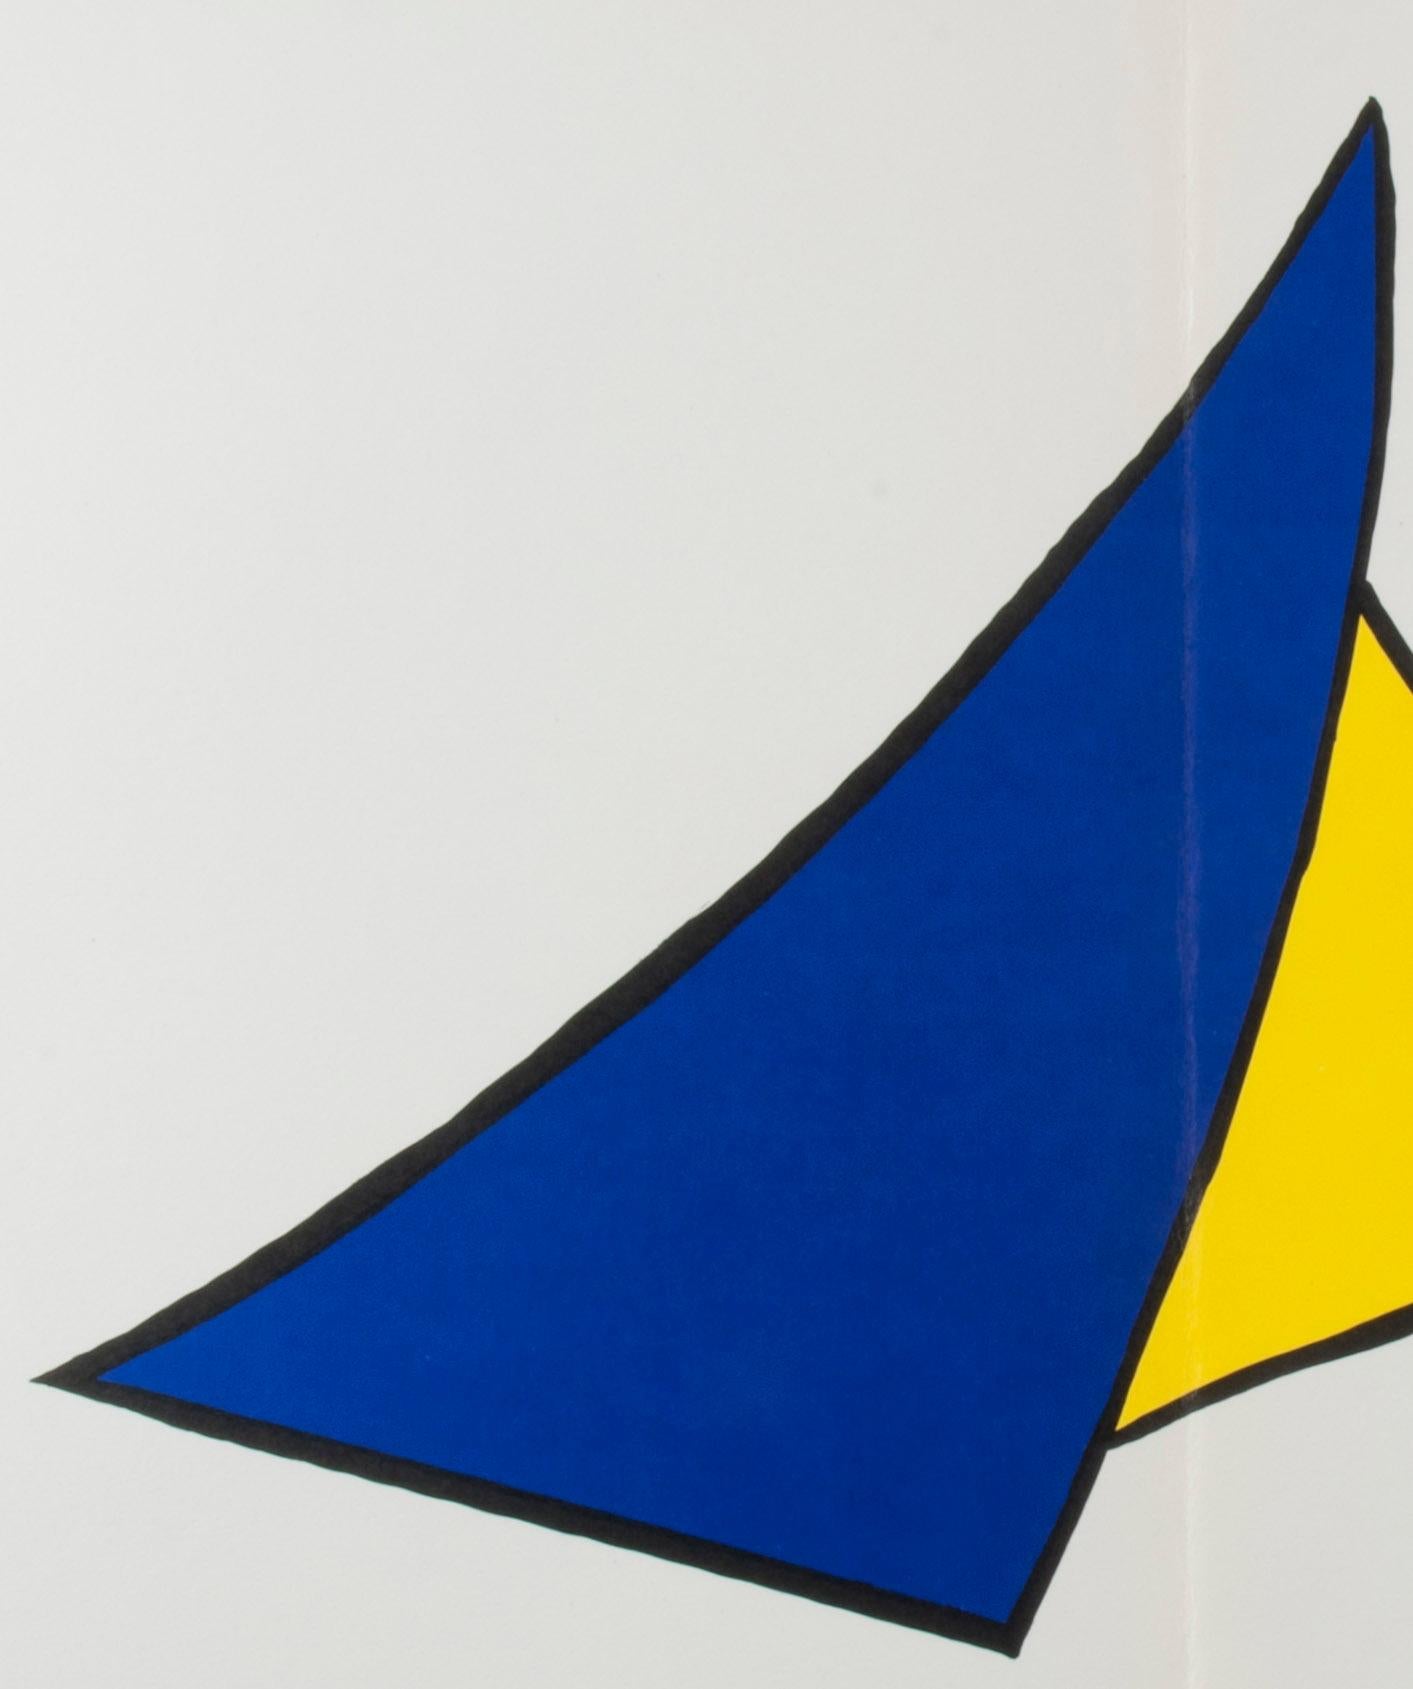 Snow-Plough (Chasse-neige) 1963 Lithograph in colors Plate 7, from DLM  - Print by Alexander Calder